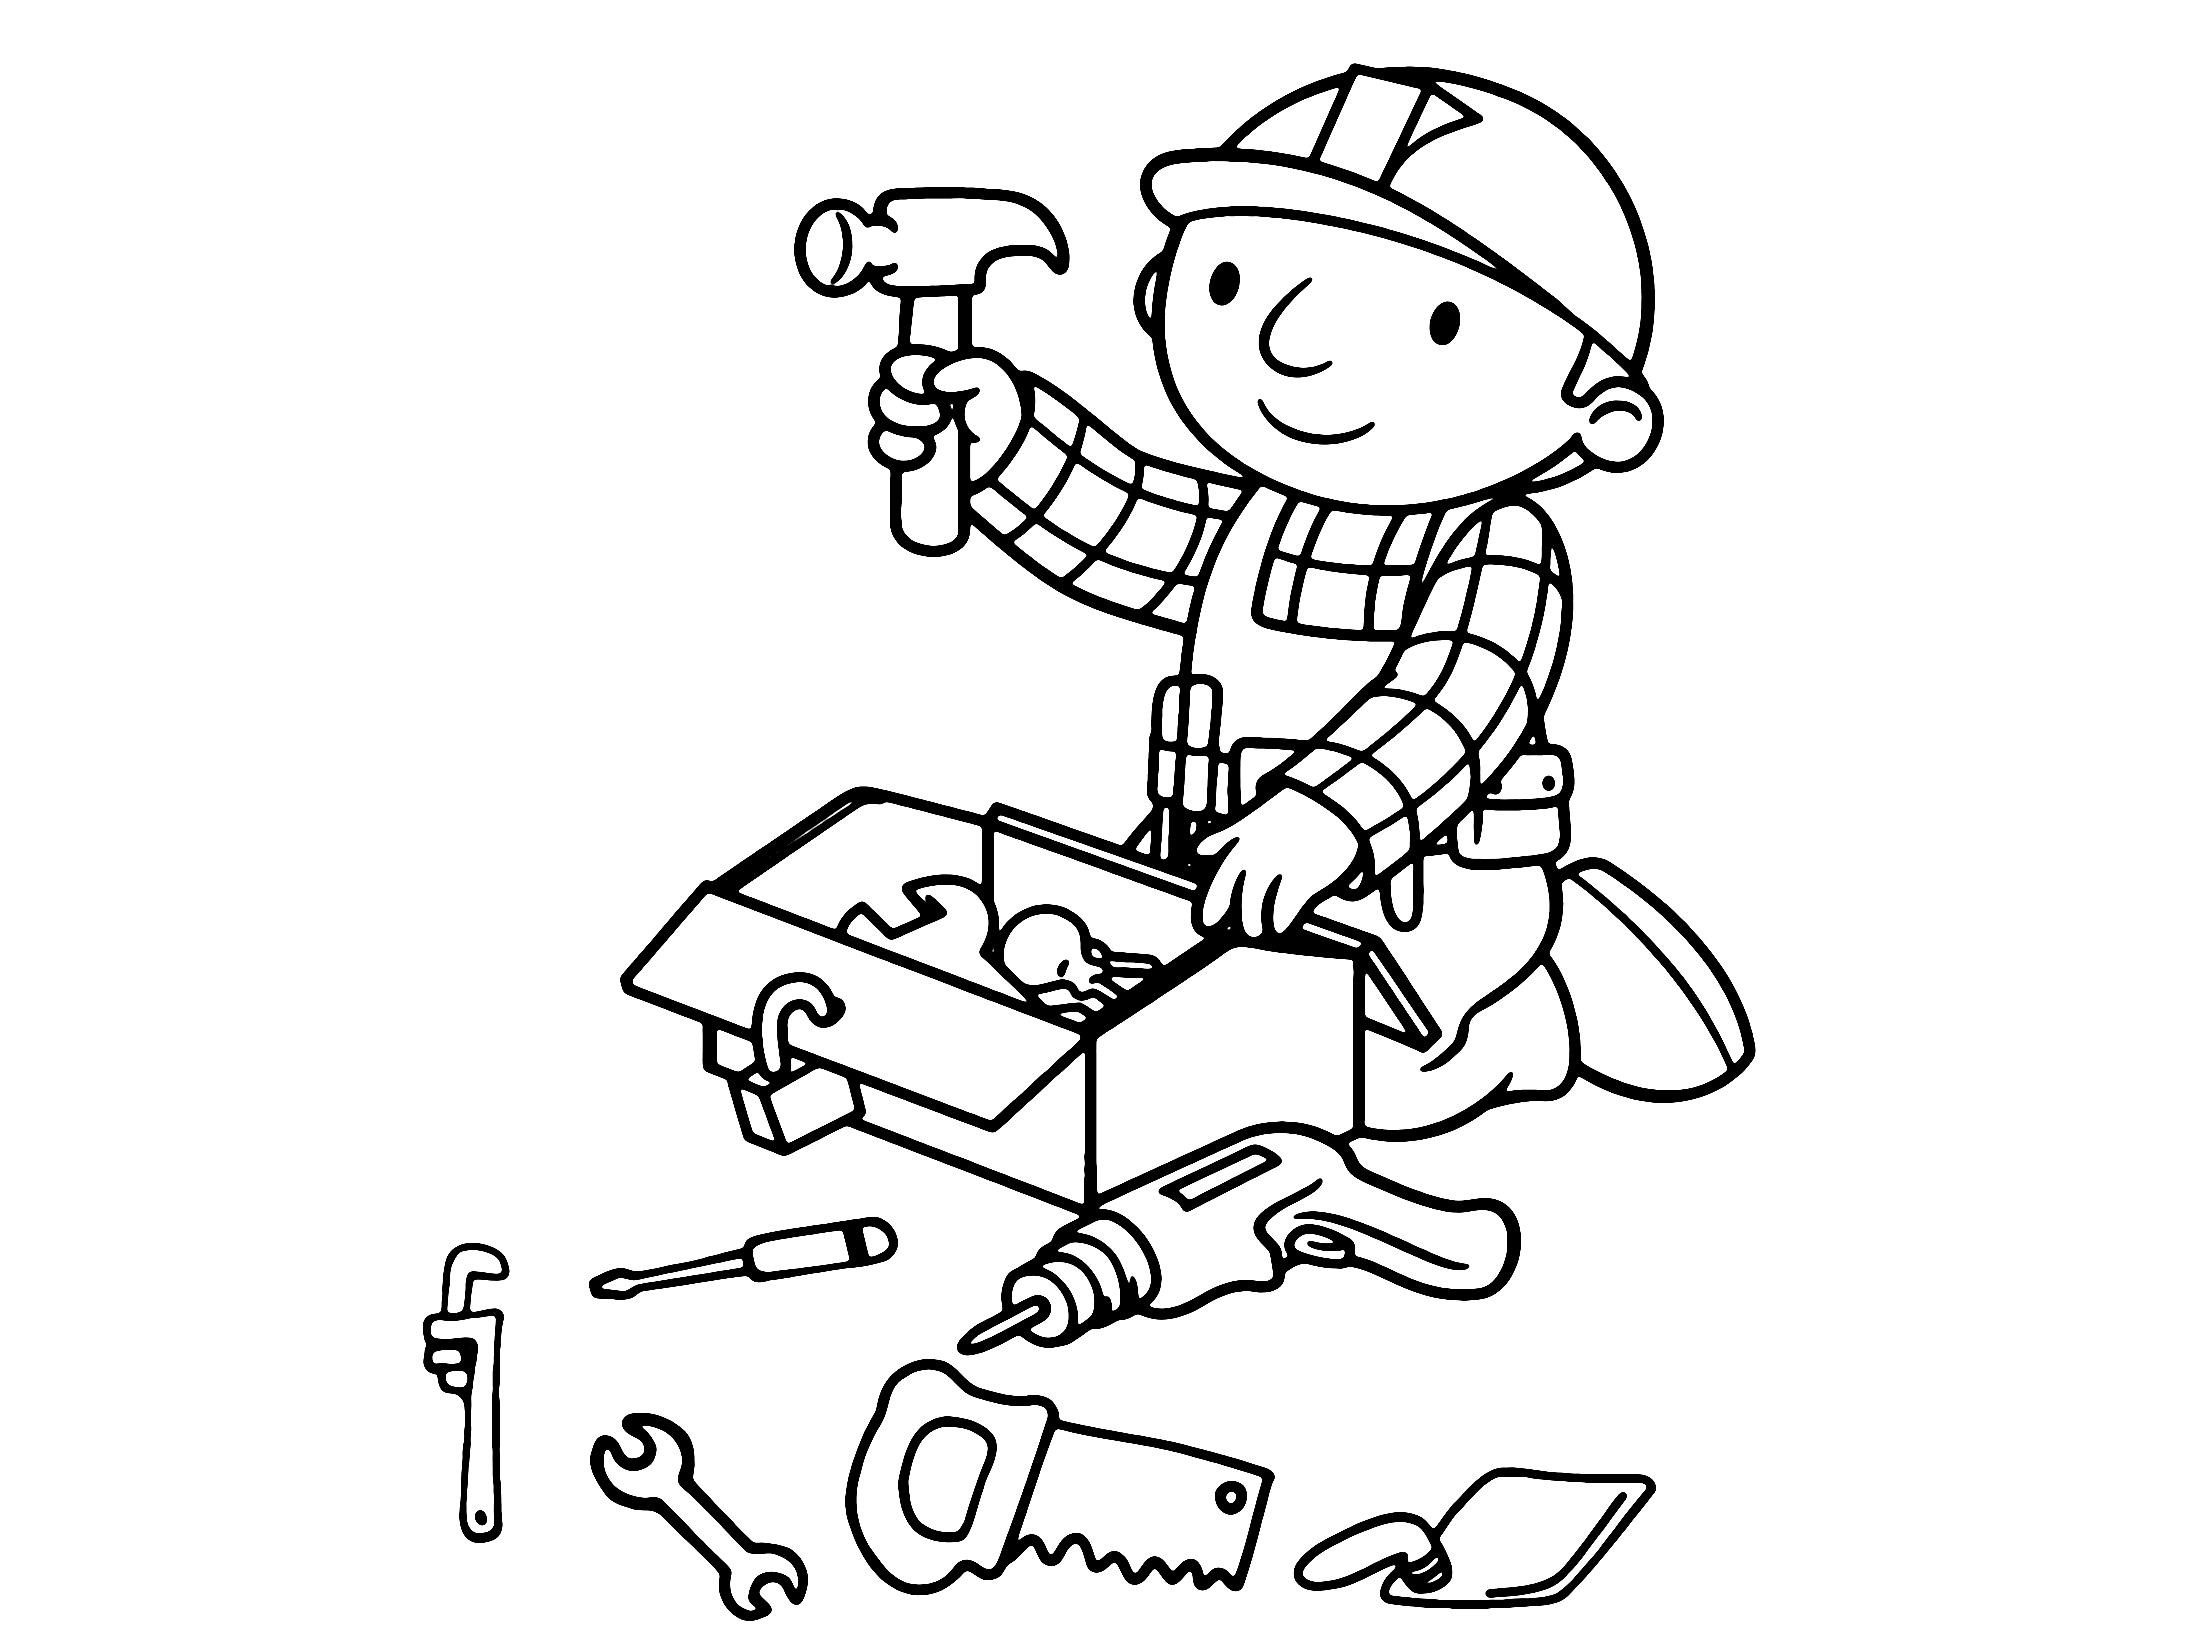 Bob with his Toolbox and Tools